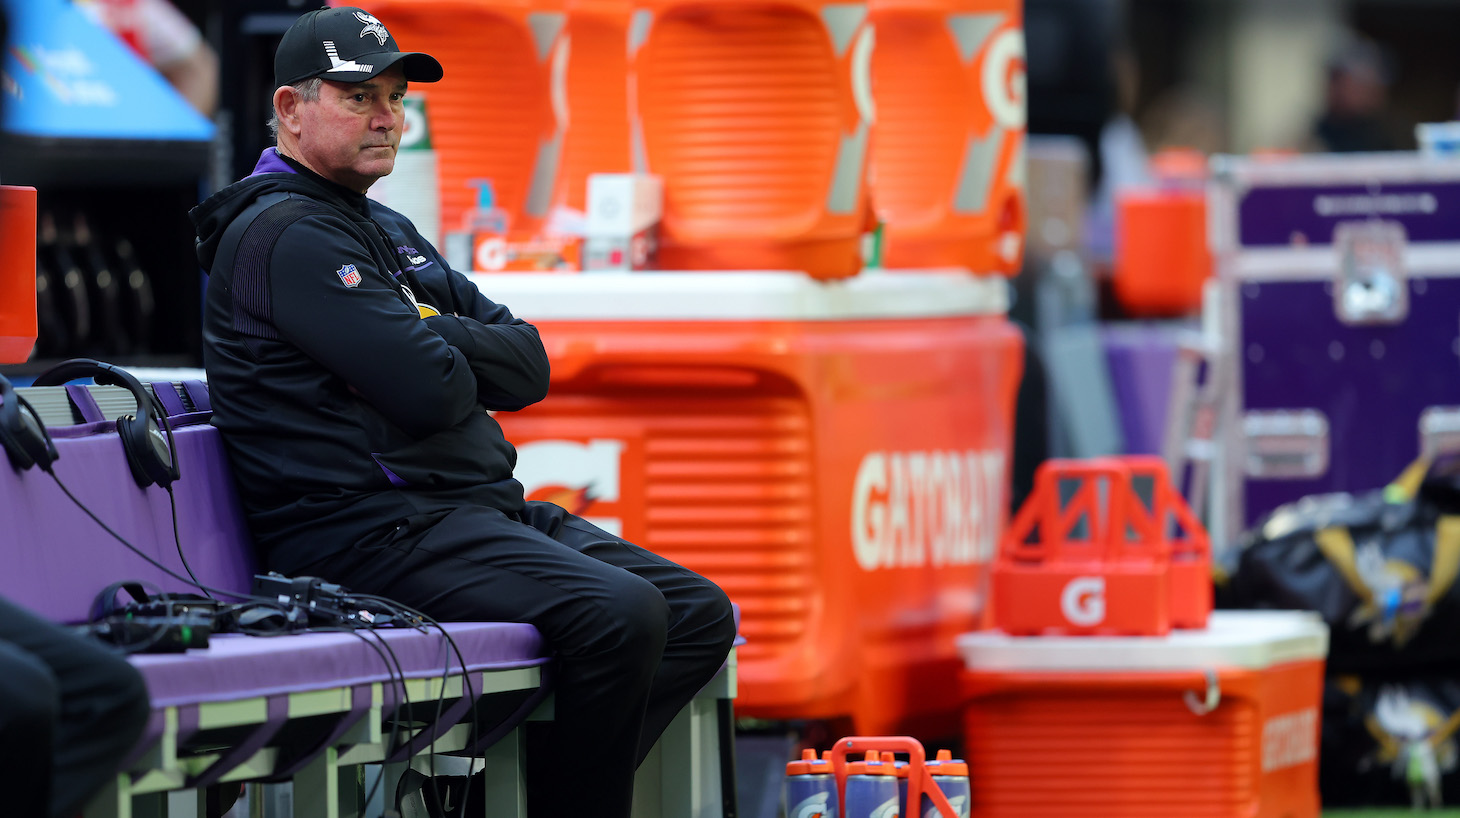 Head coach Mike Zimmer of the Minnesota Vikings looks on from the bench on the sidelines during warm ups prior to the game against the Chicago Bears at U.S. Bank Stadium on January 09, 2022 in Minneapolis, Minnesota.